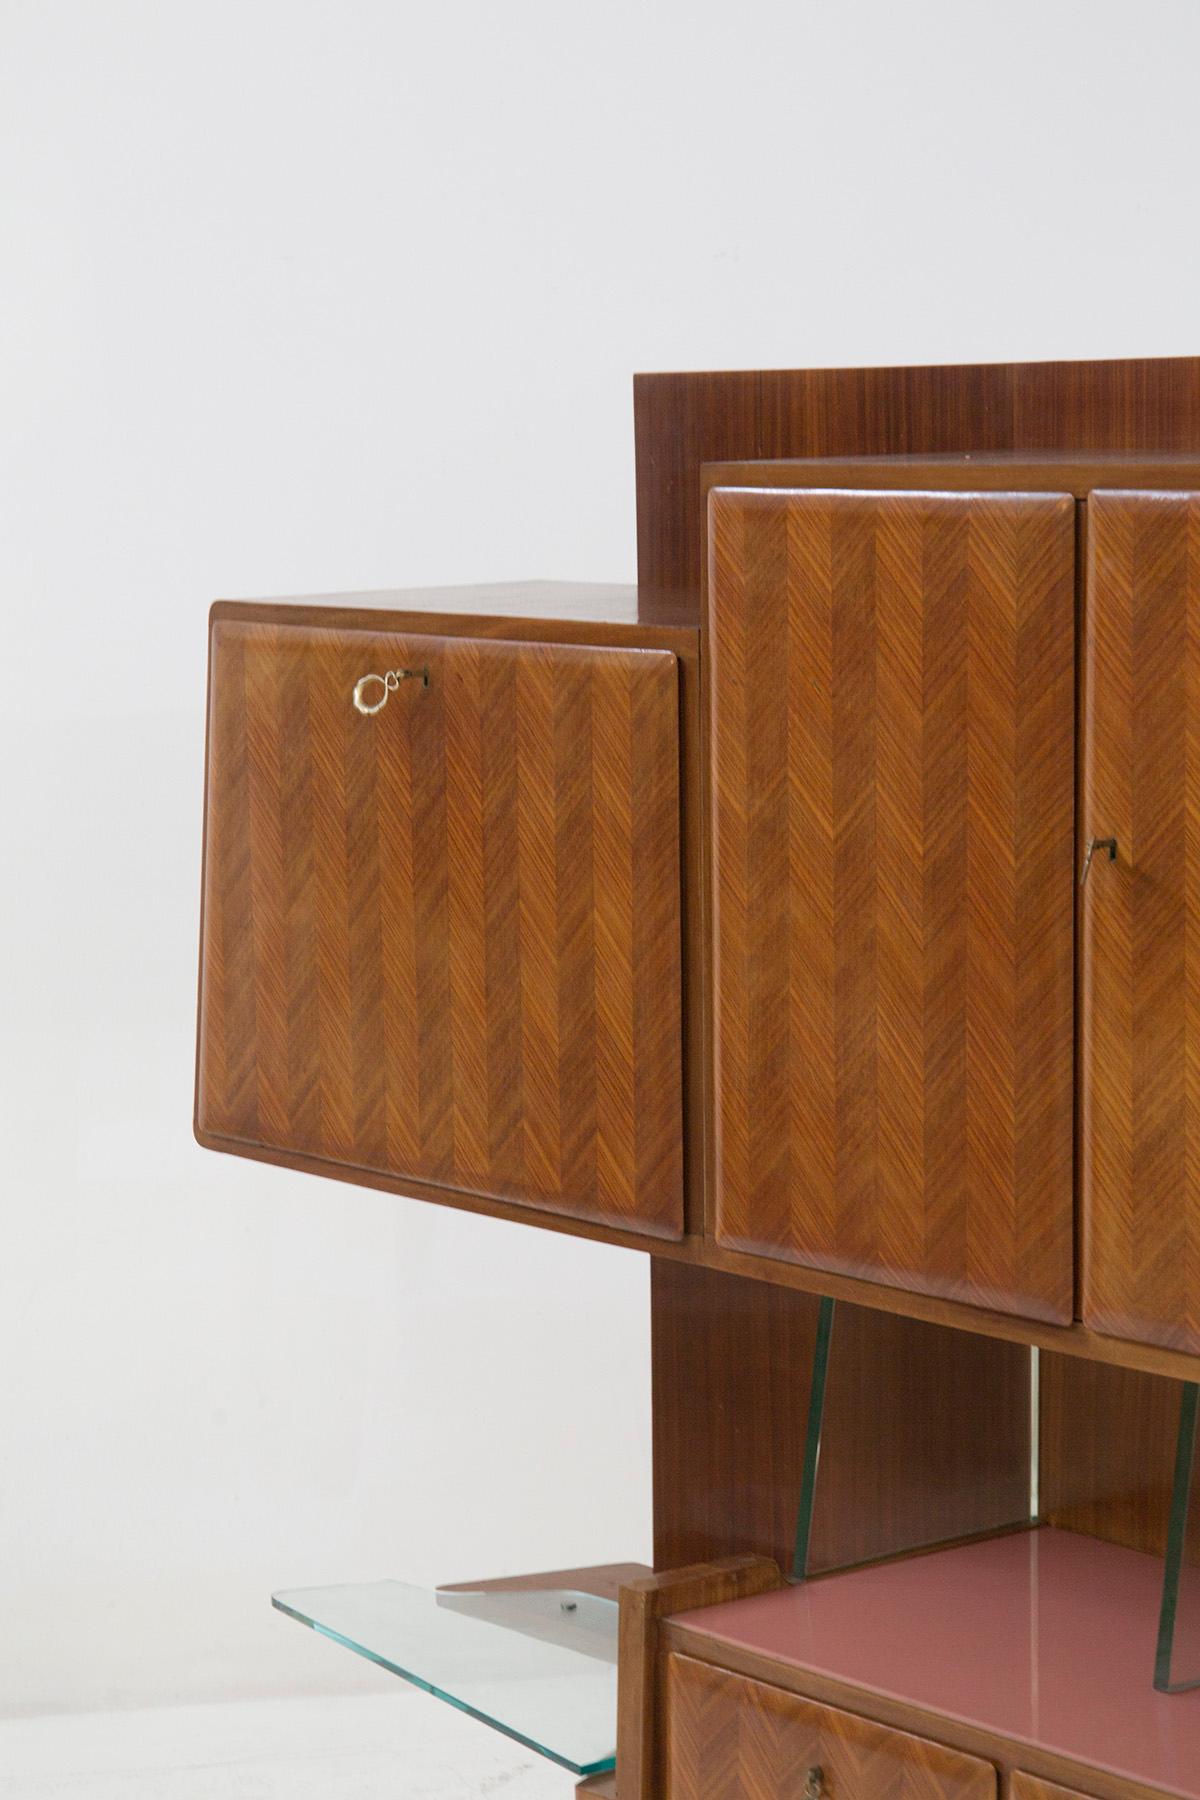 Splendid wooden wall cabinet attributed to the great designer Paolo Buffa in the 1950s, with Fontana Arte manufacture for the glass.
The cabinet has a base supported by 6 legs in Buffa's style, punched and quite thick, with an inverted triangular